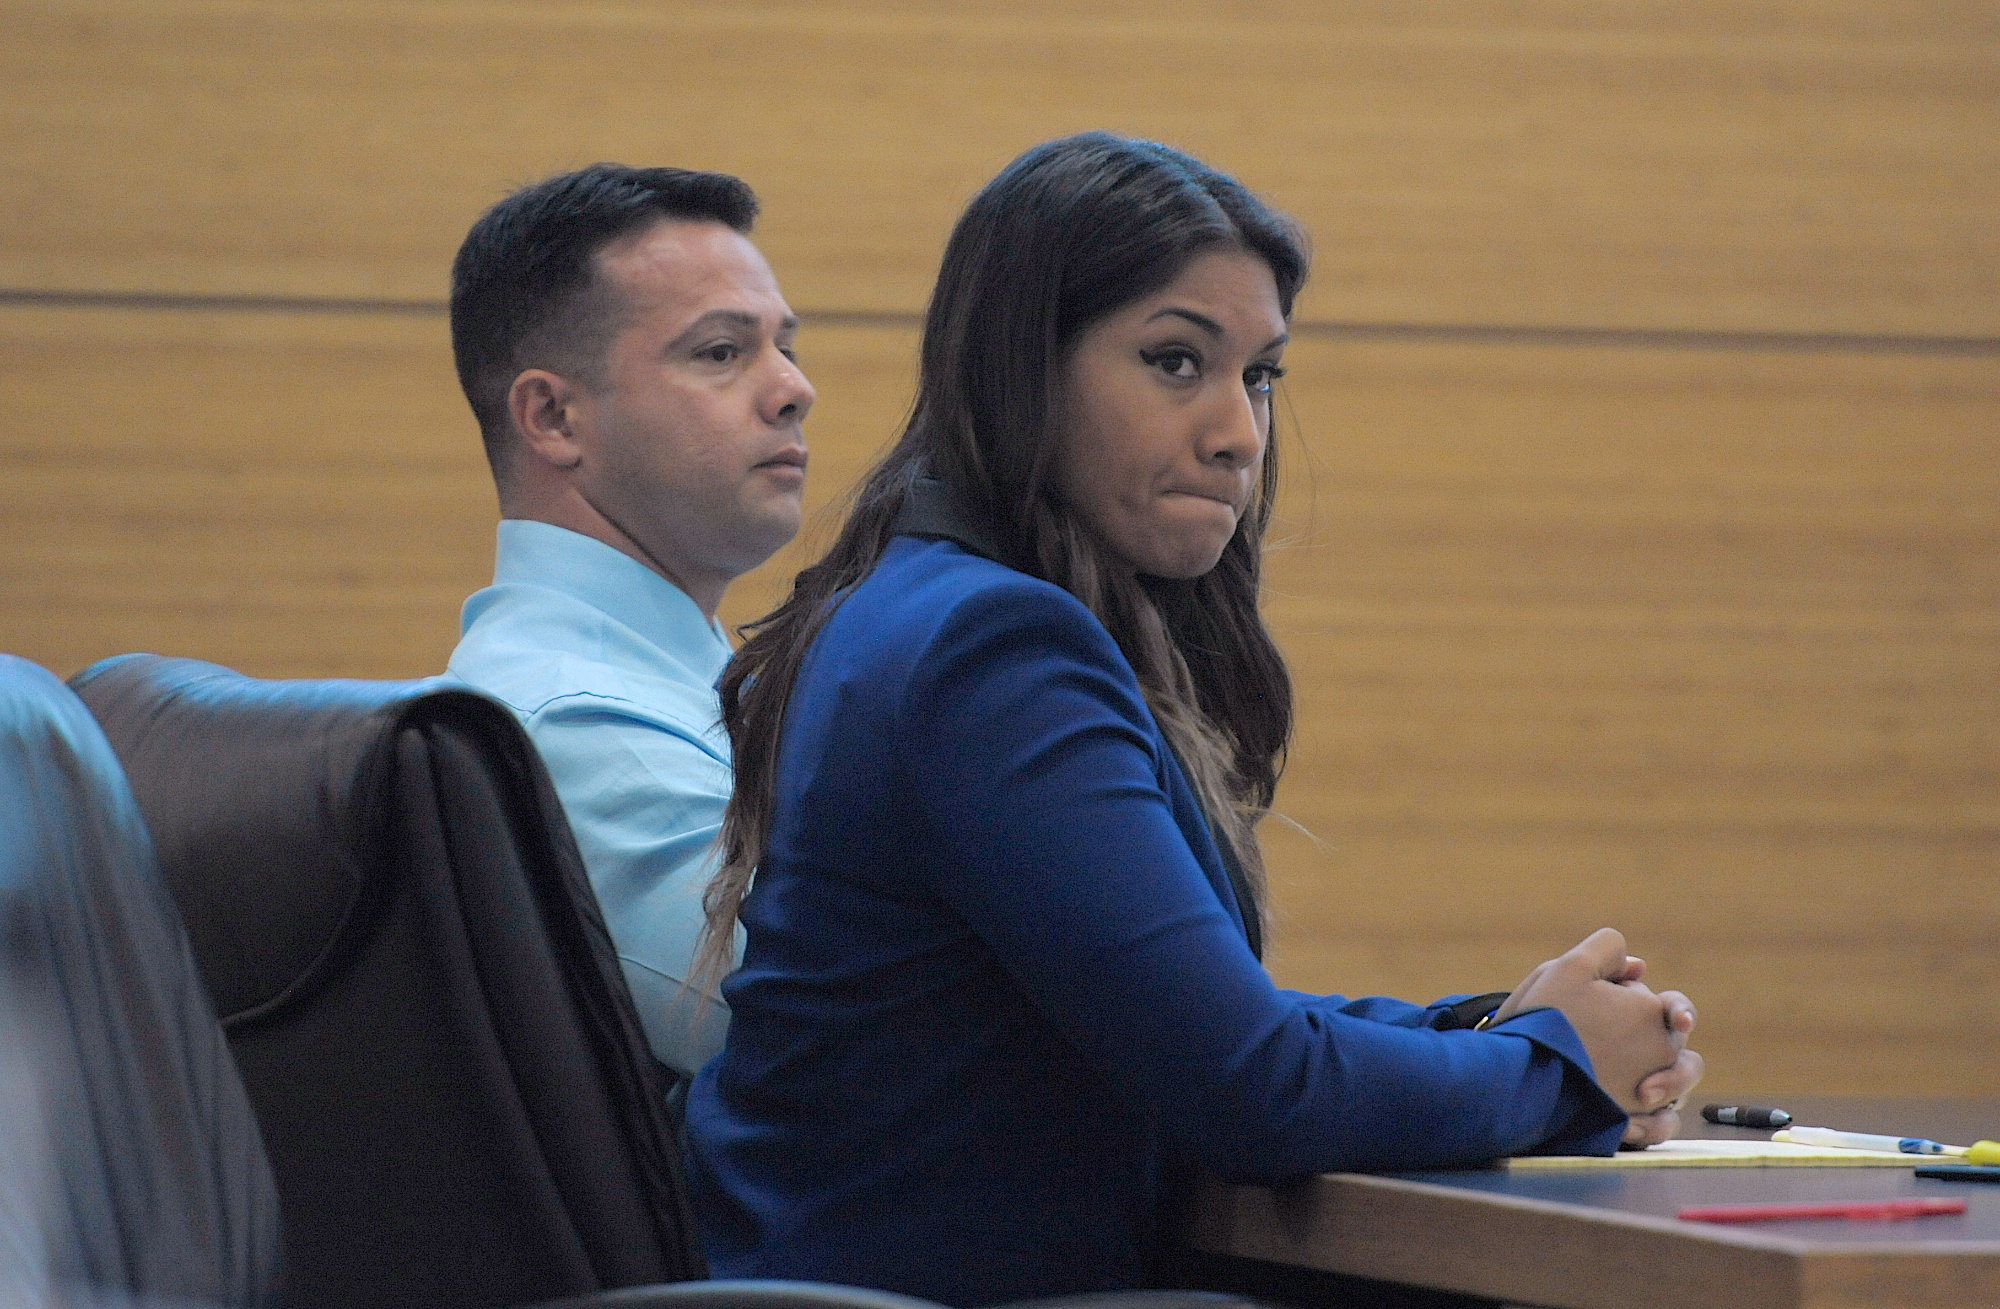 Elissa Alvarez, 20, right, and Jose Caballero, 40, listen to witness testimony during their trial for lewd and lascivious exhibition on May 1, 2015, at the Manatee County Judicial Center in Bradenton. (Paul Videla—Bradenton Herald)